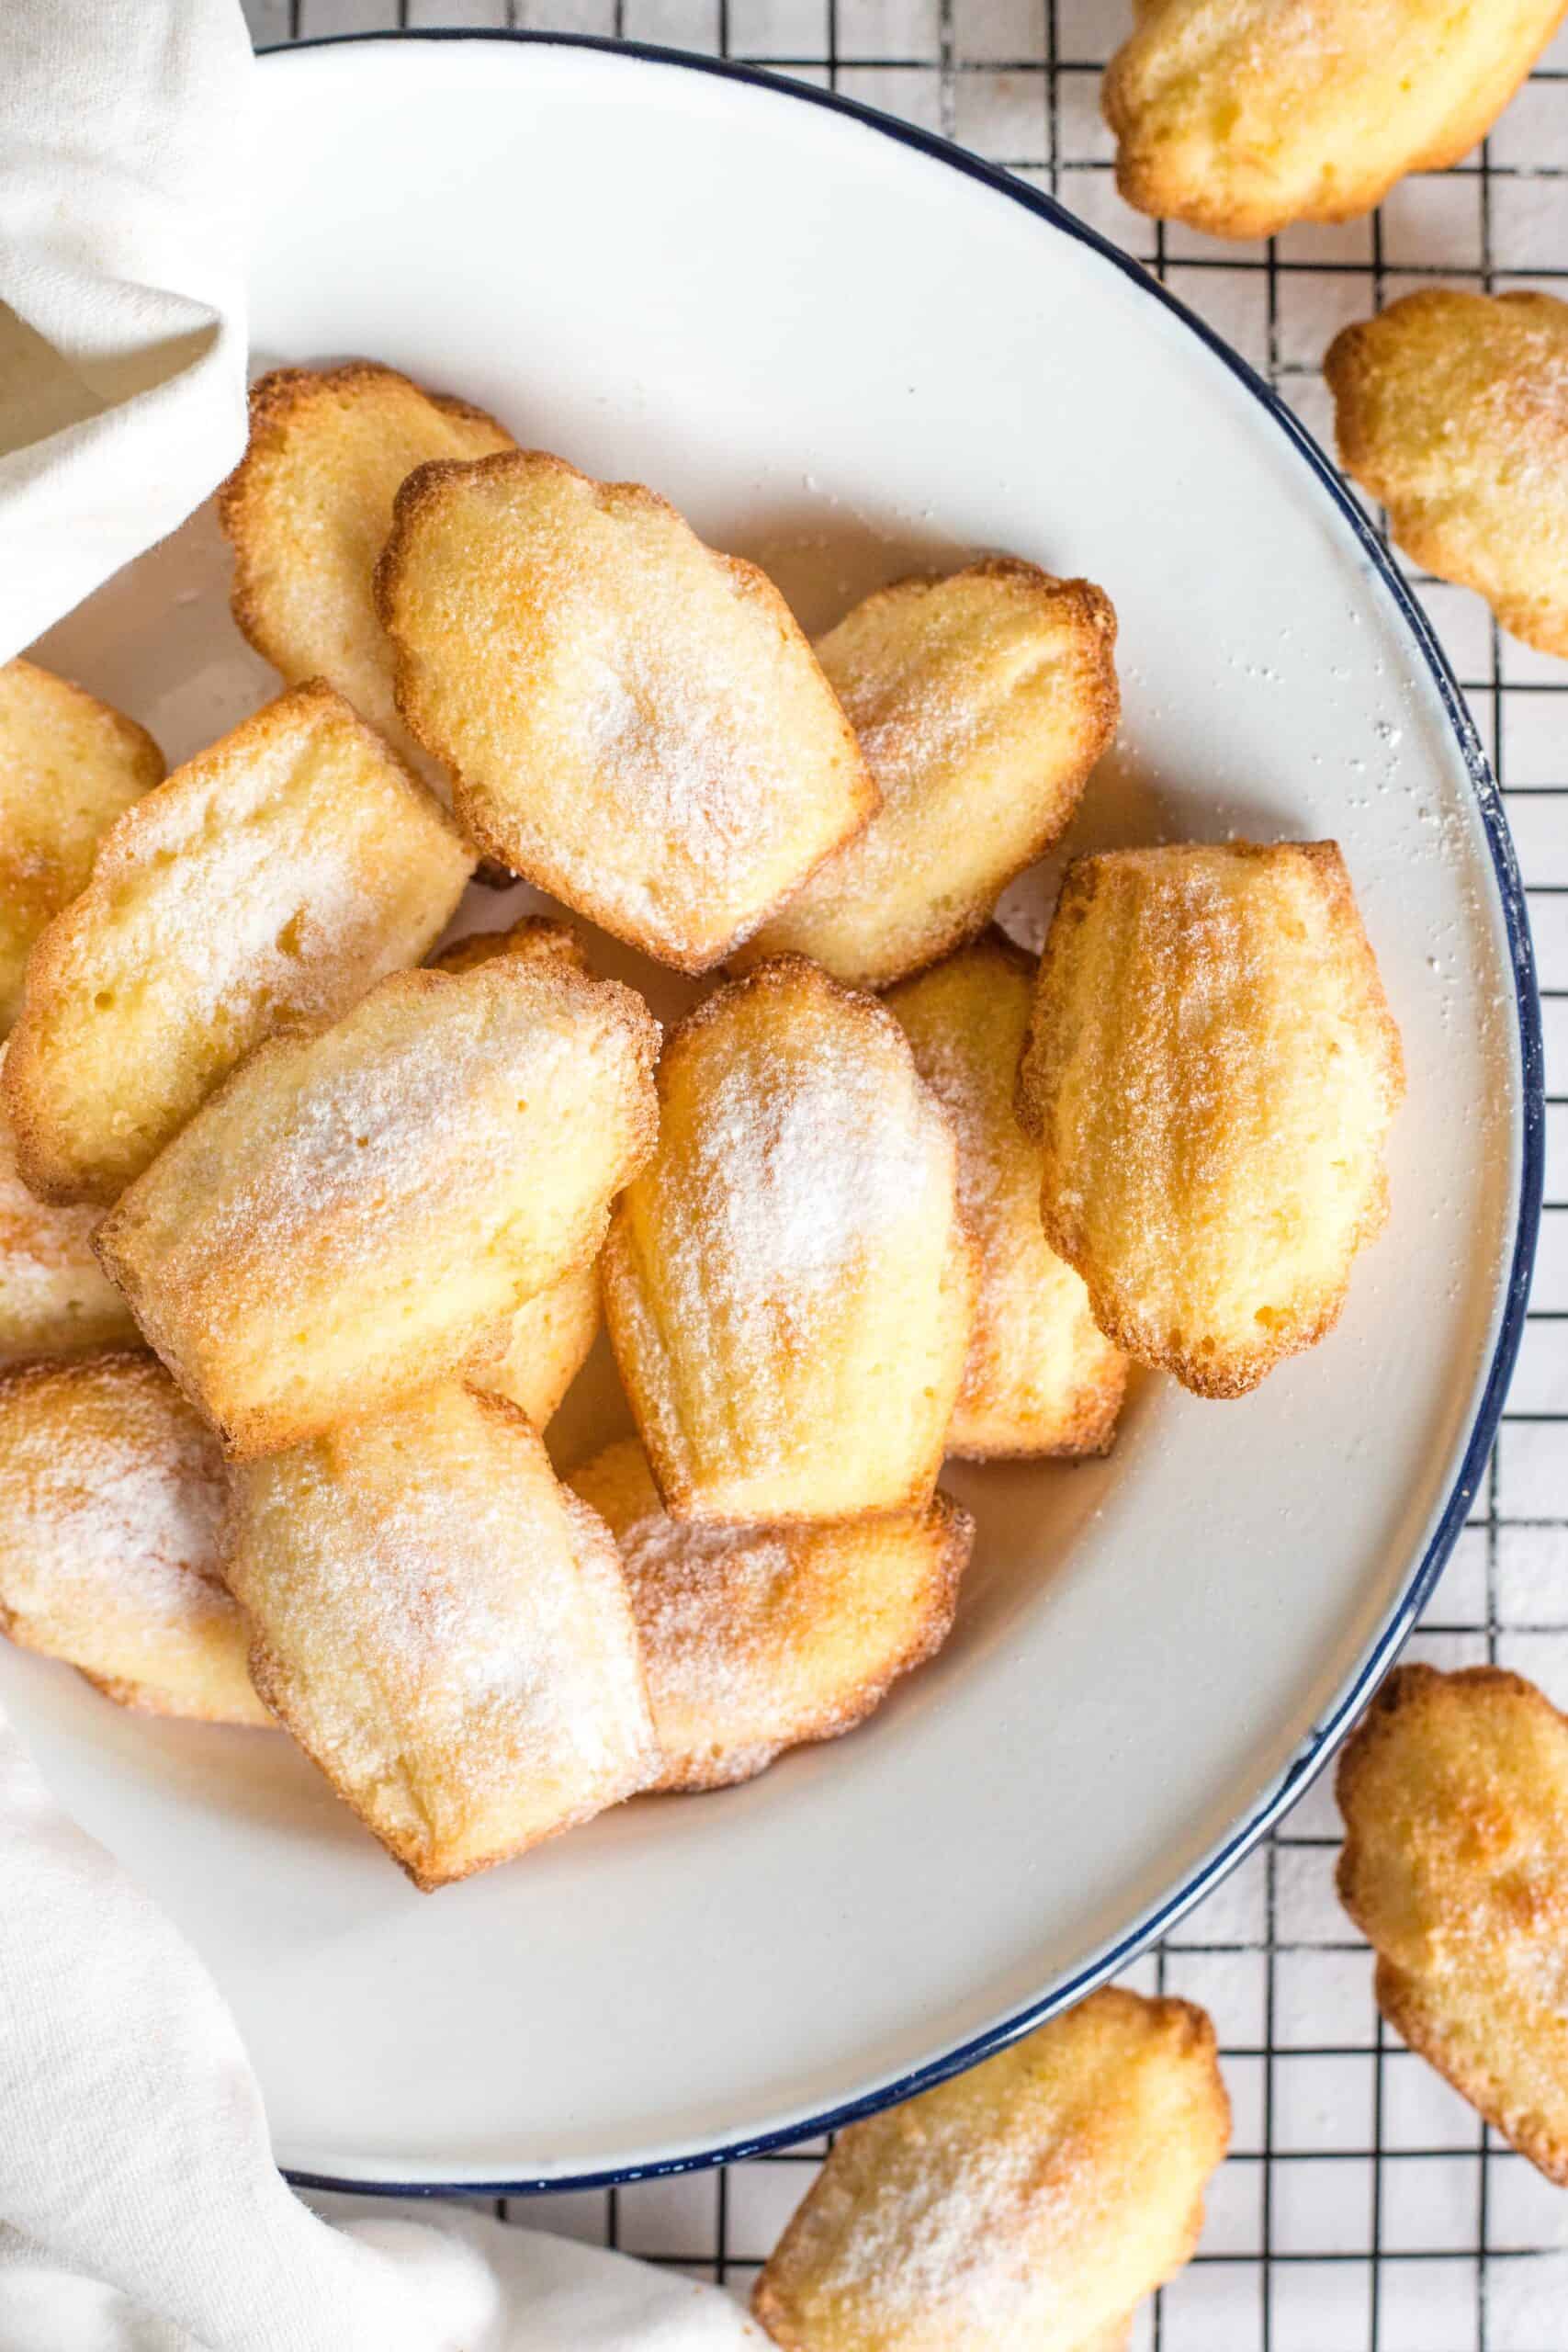 A plate full of gluten-free madeleines on a wire rack.